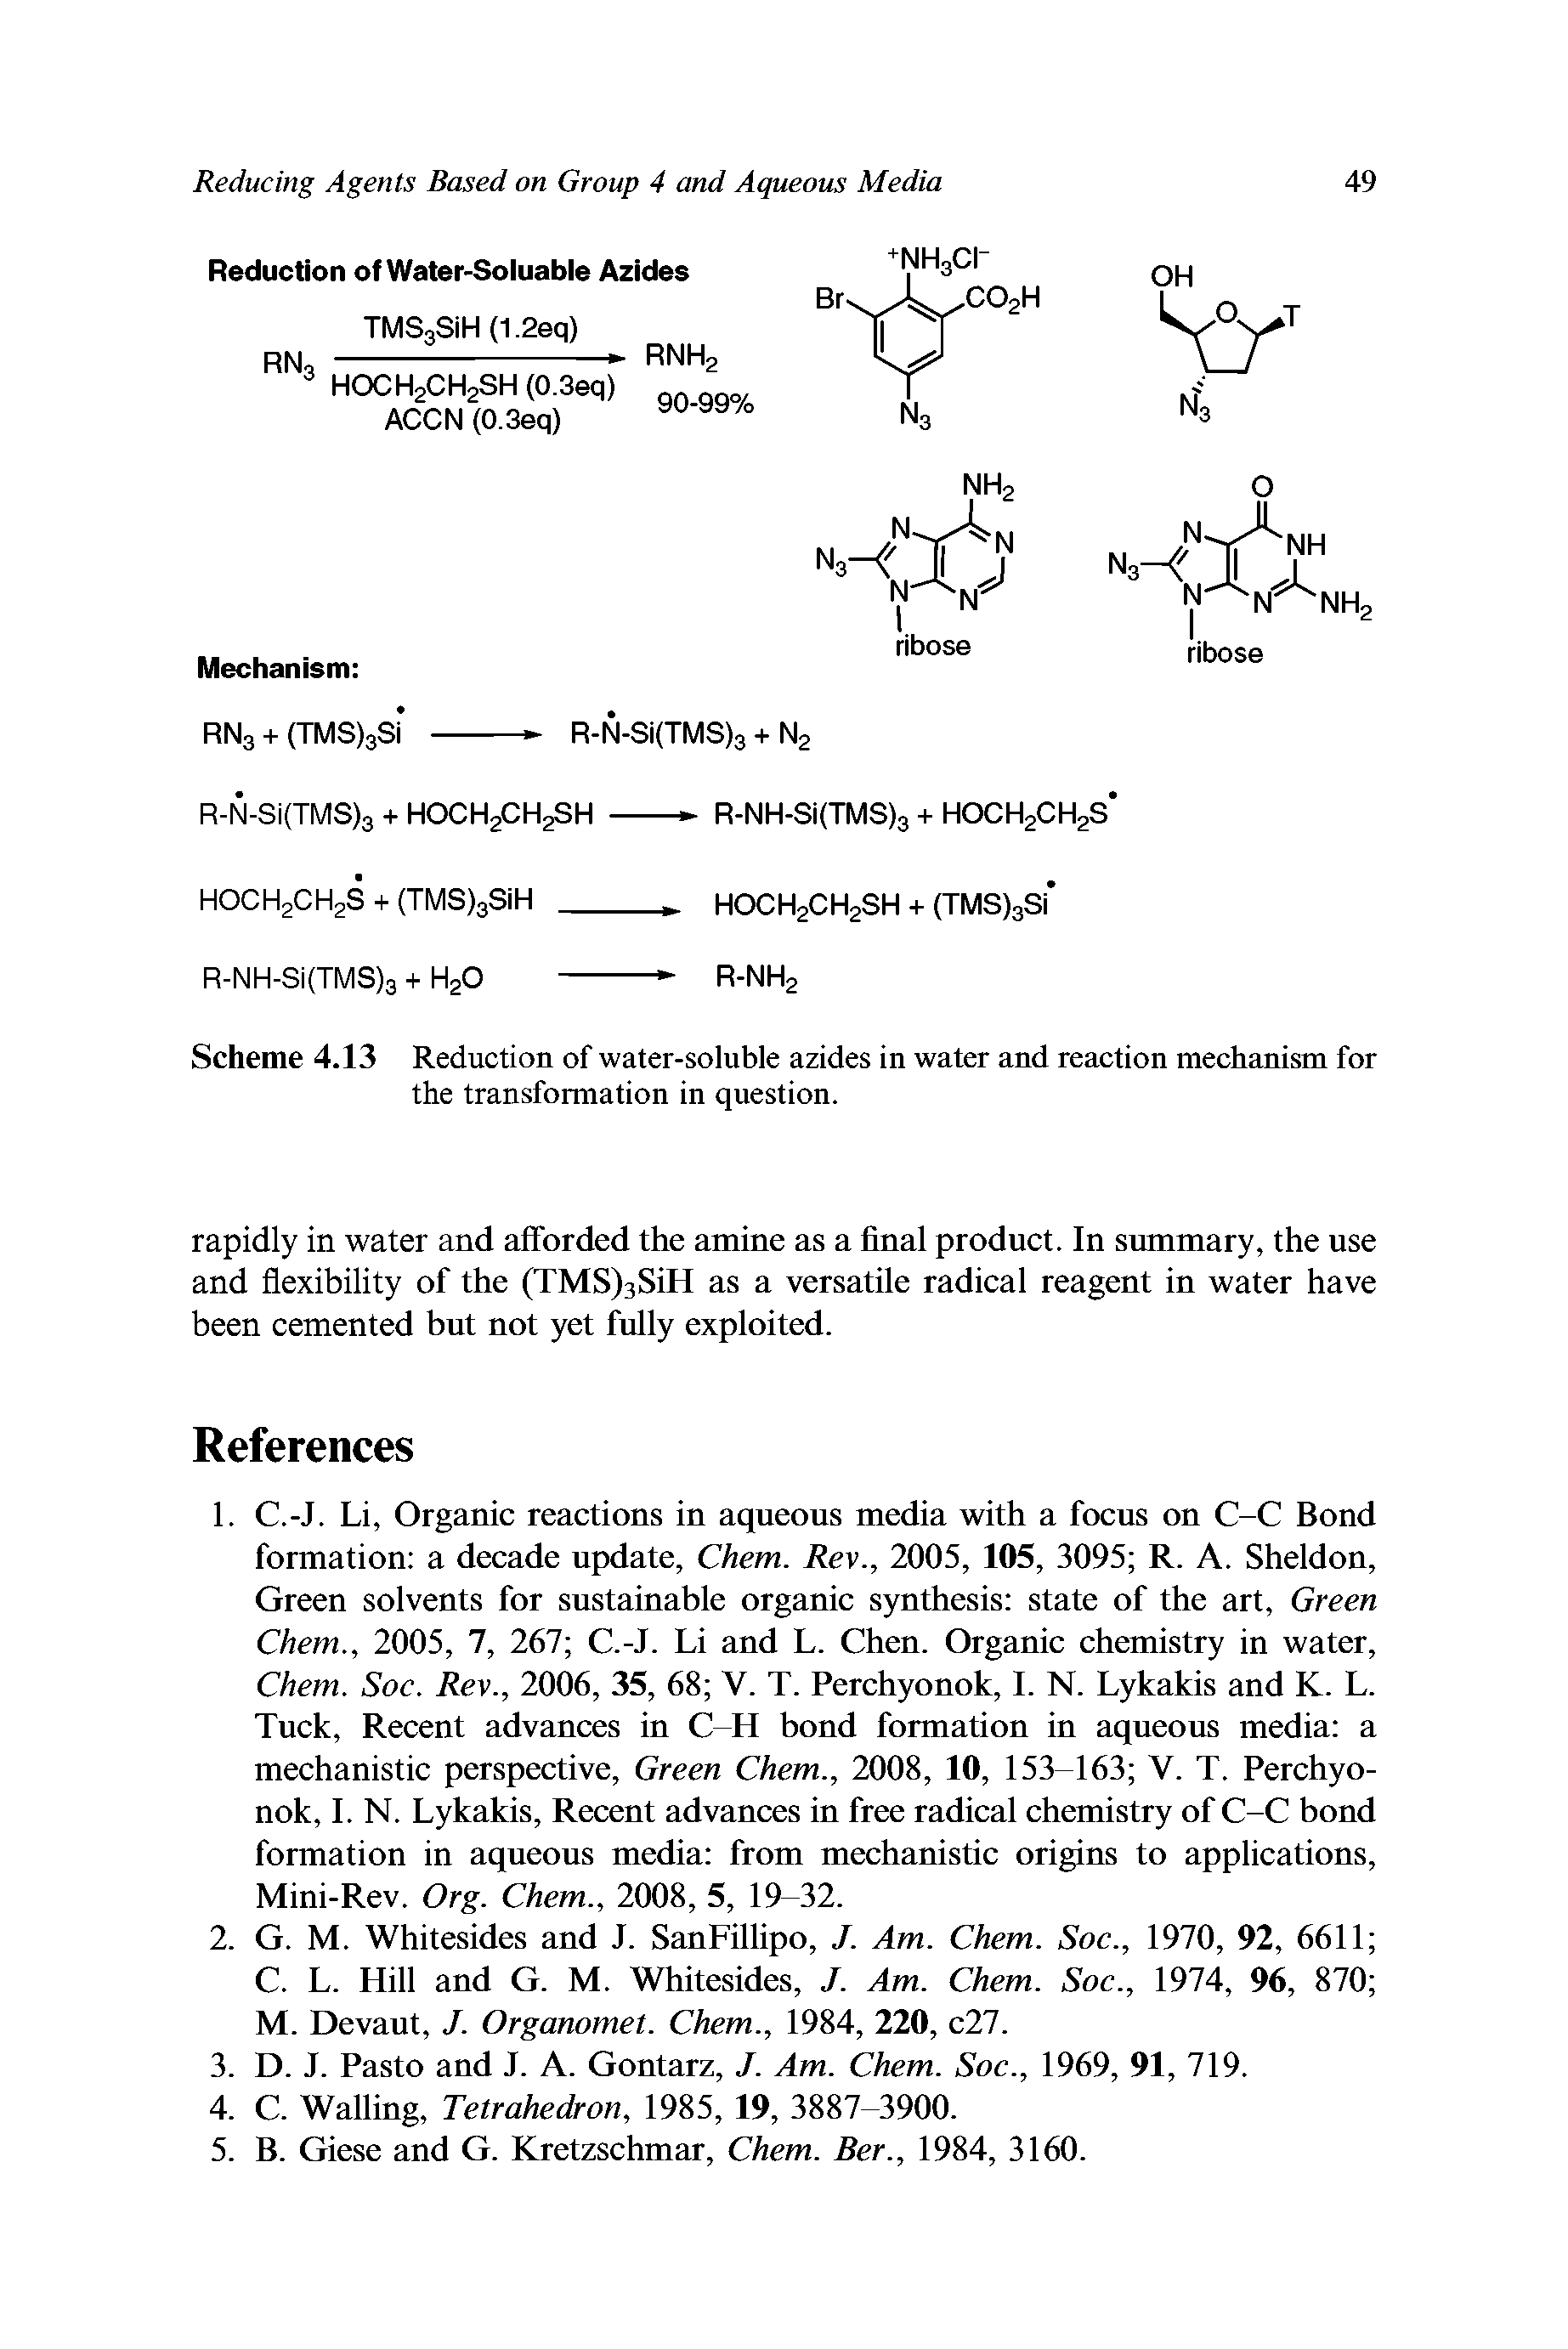 Scheme 4.13 Reduction of water-soluble azides in water and reaction mechanism for the transformation in question.